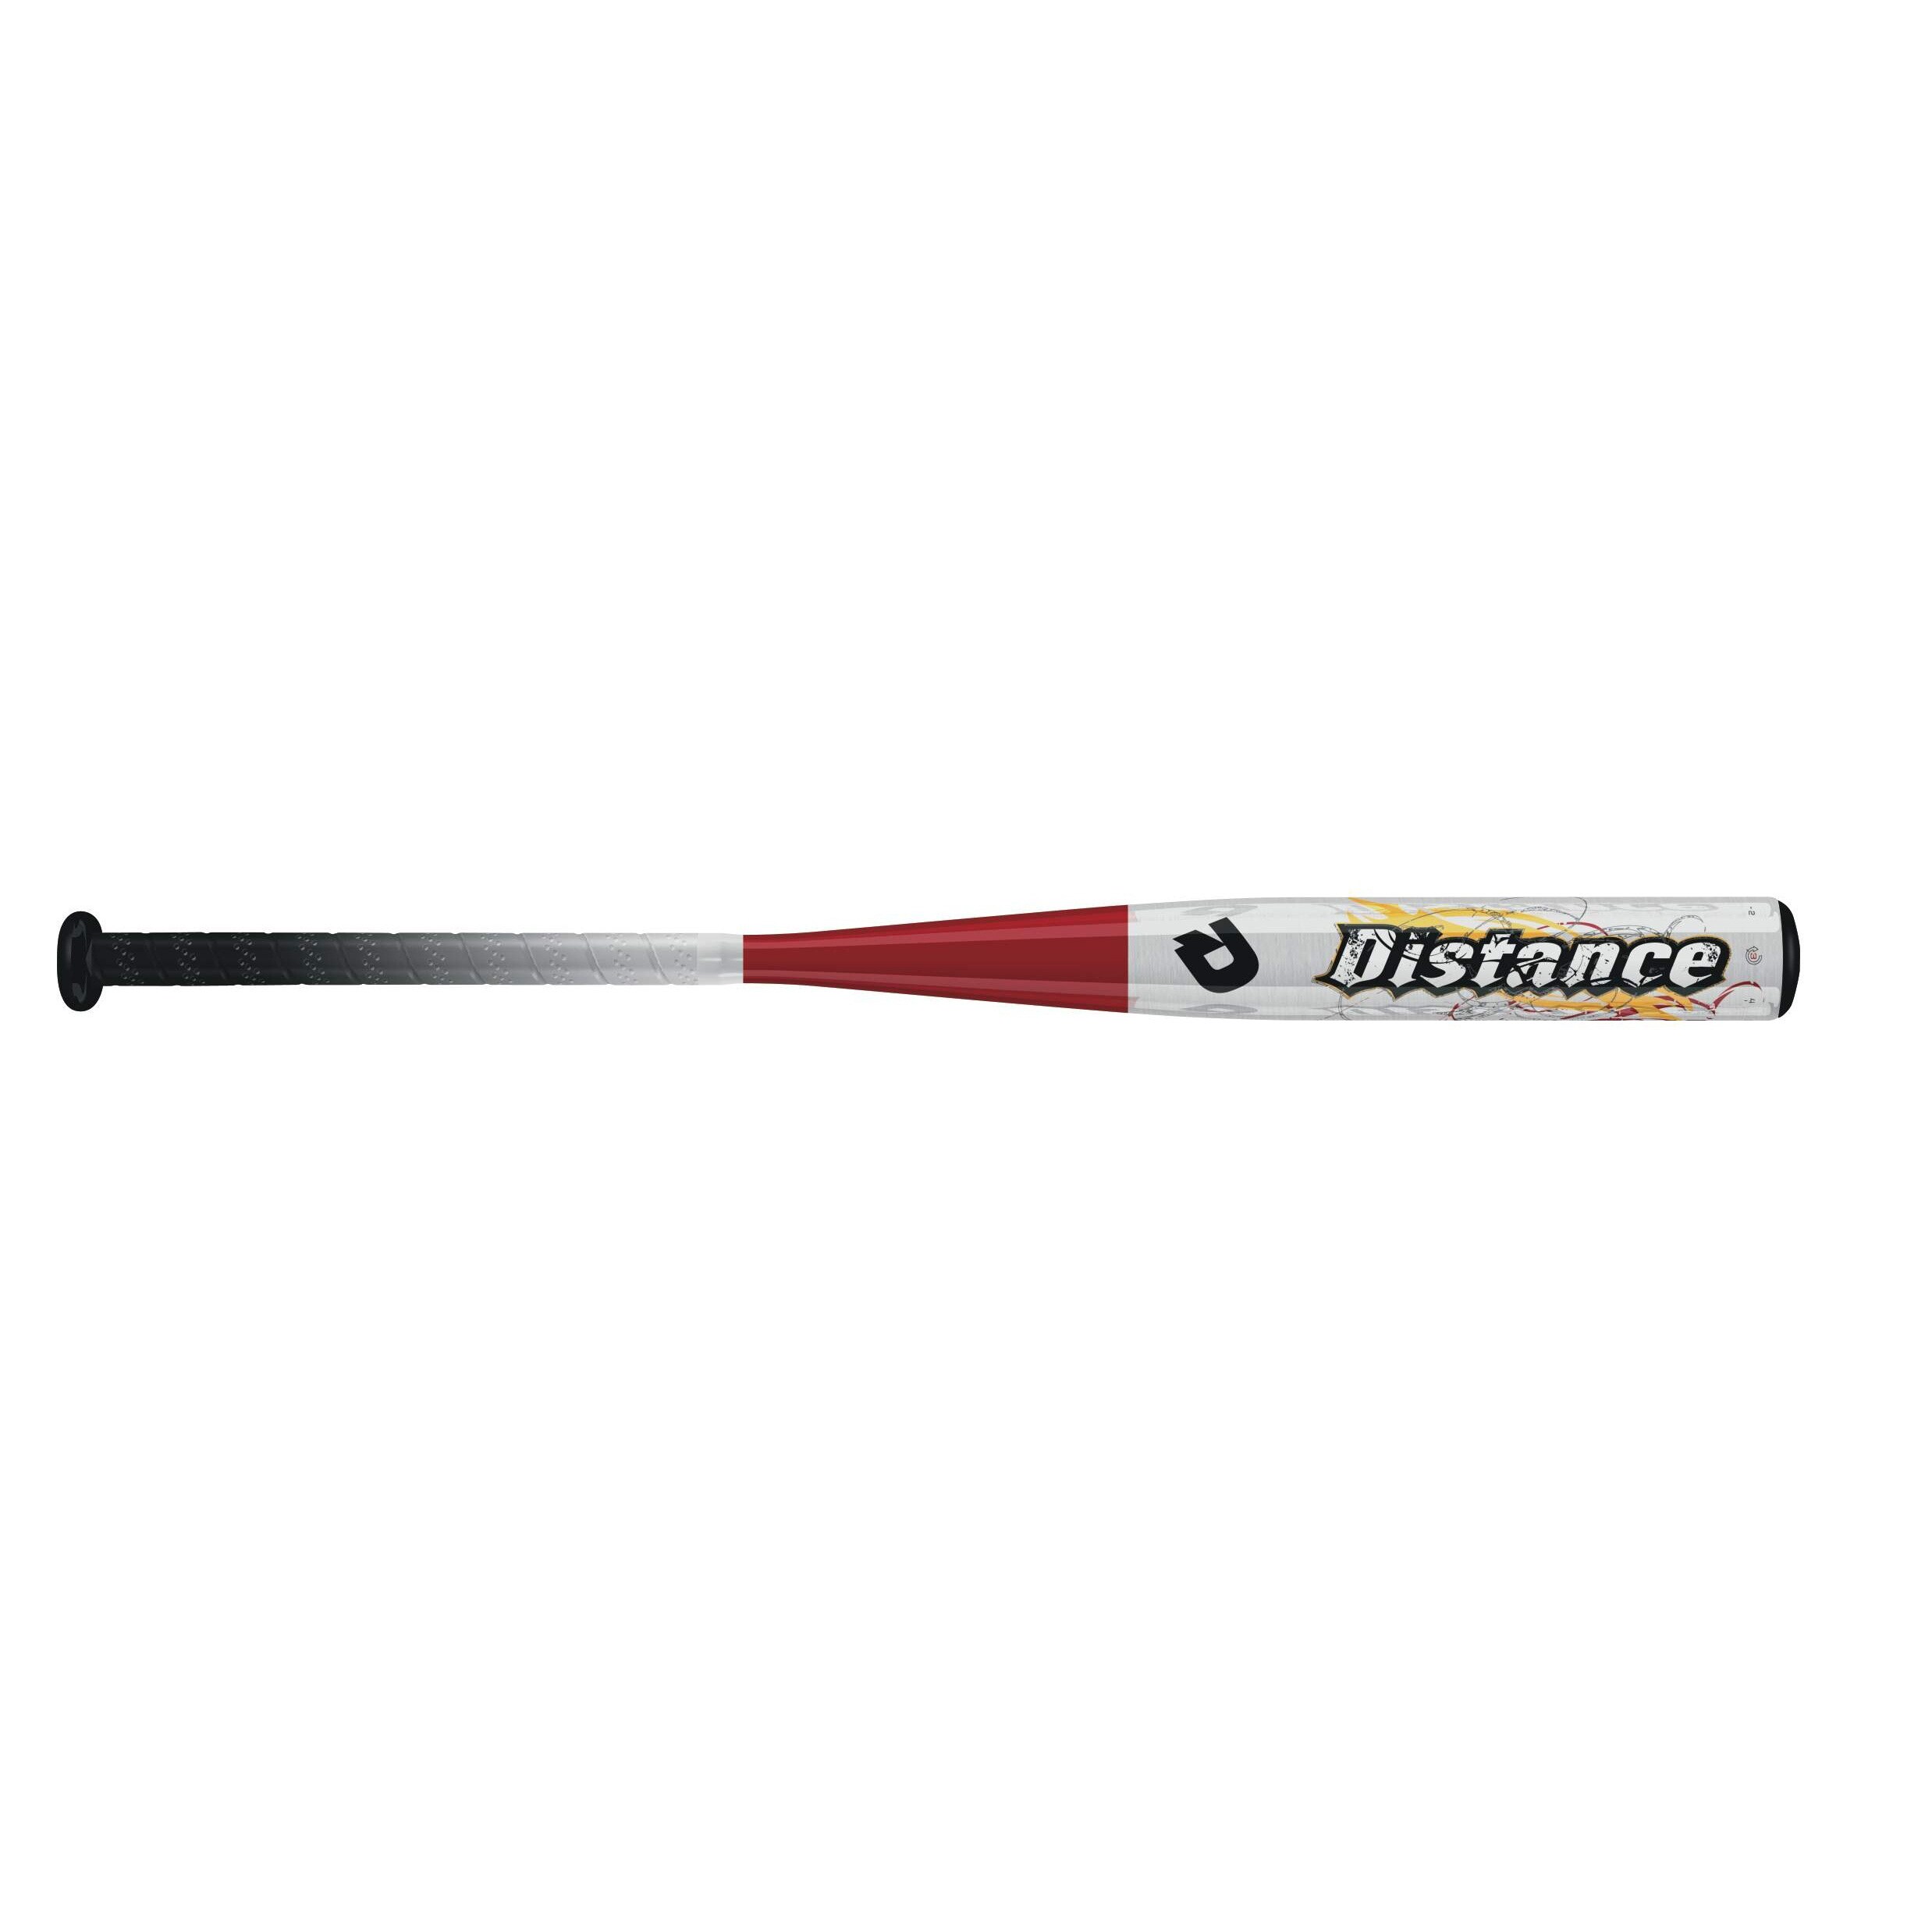 Distance 29 inch Youth Little League Bat Today $48.99